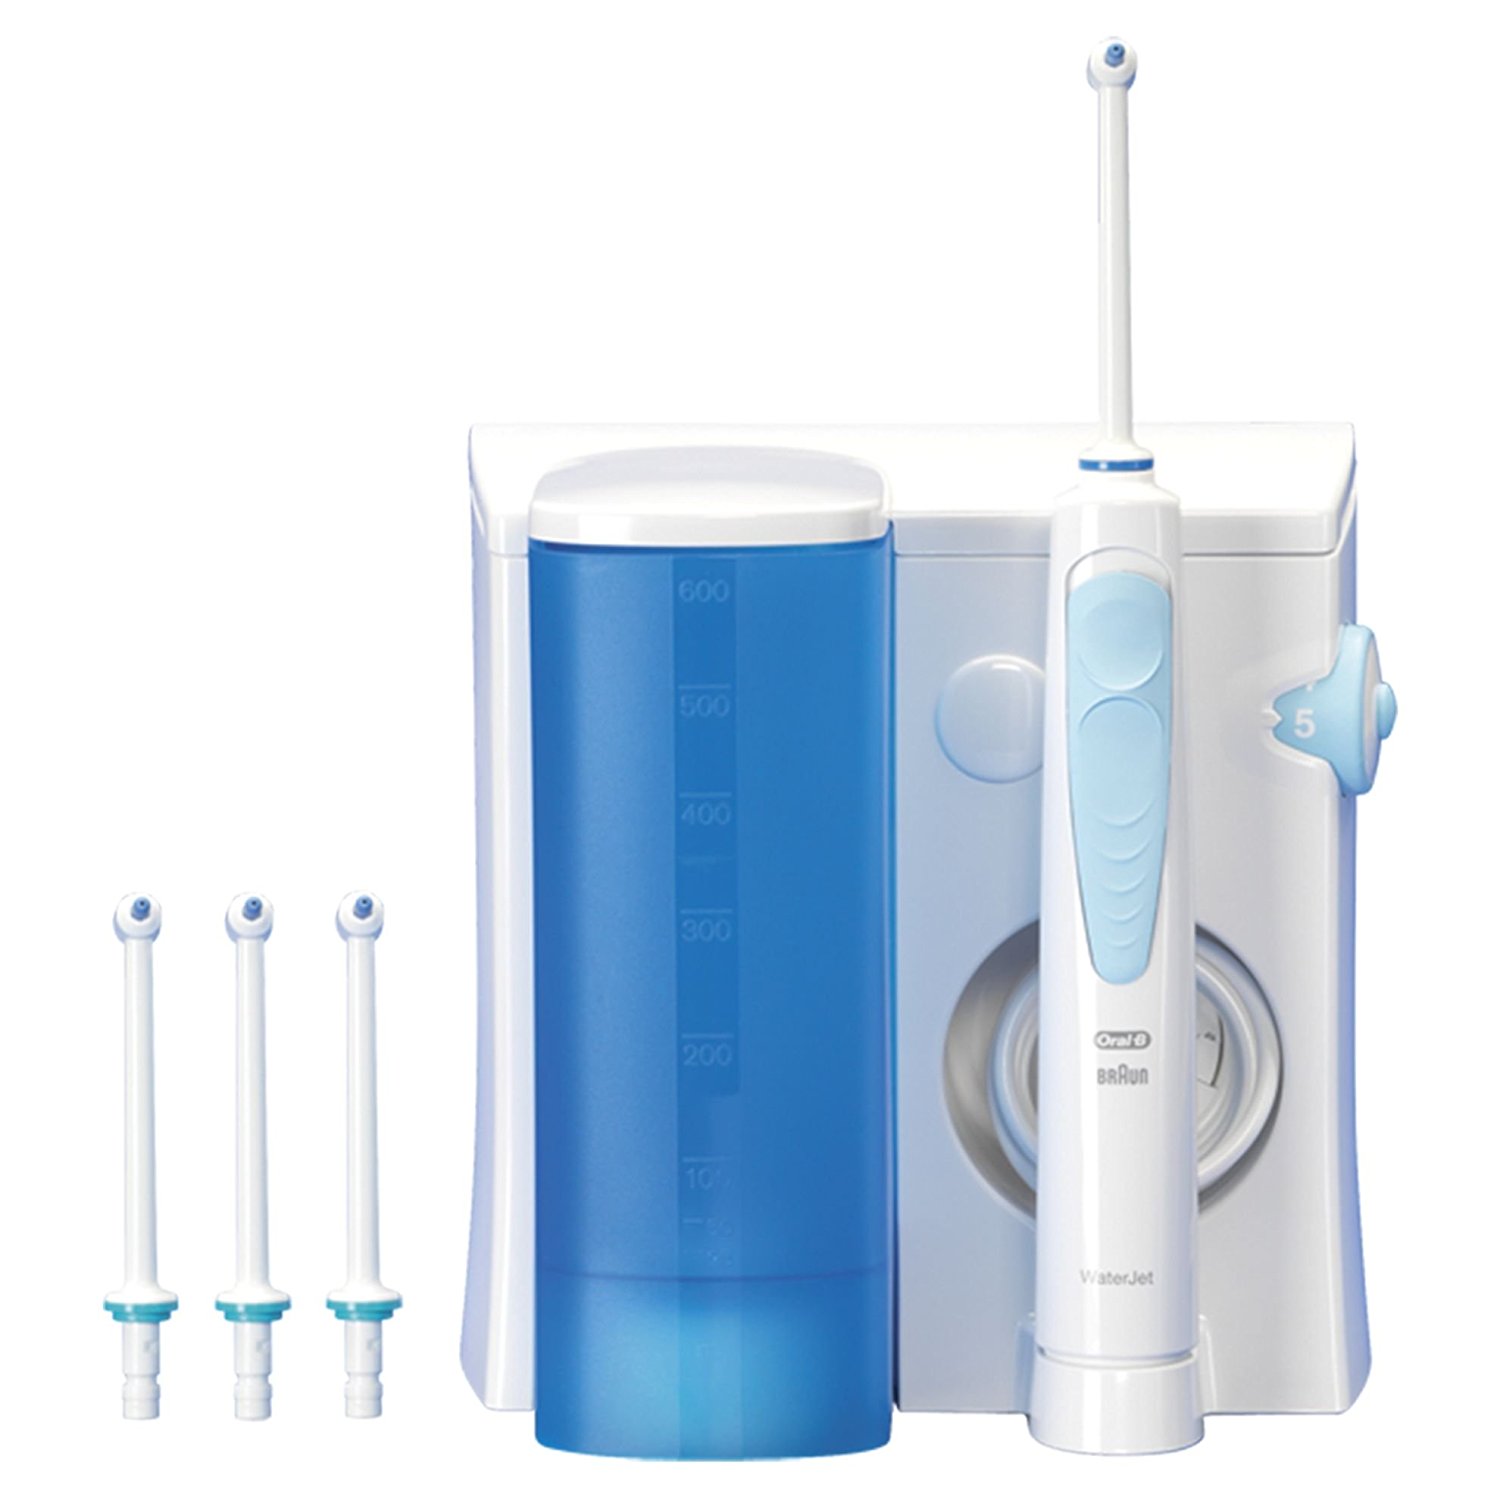 Oral-B Professional Care Waterjet